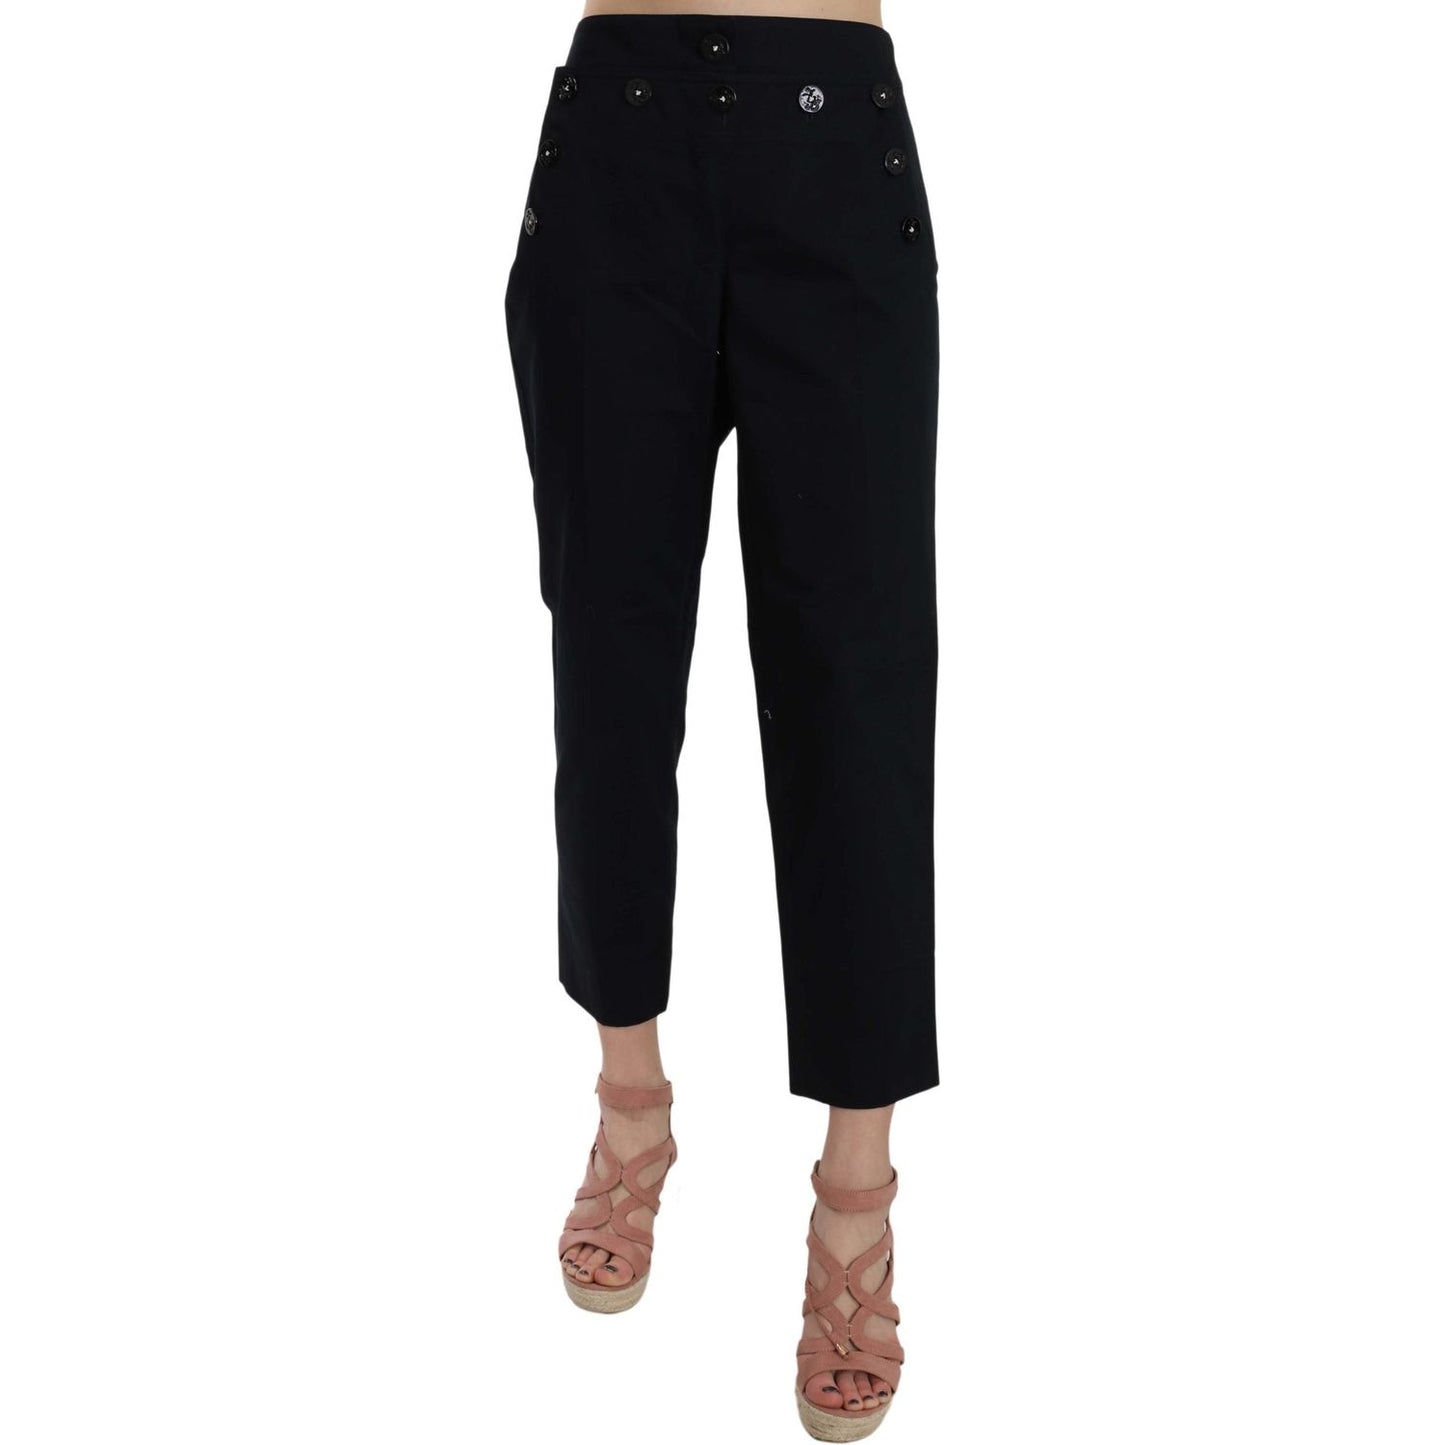 Dolce & Gabbana Chic Black Cotton Trousers Jeans & Pants black-cropped-front-button-embellished-pants